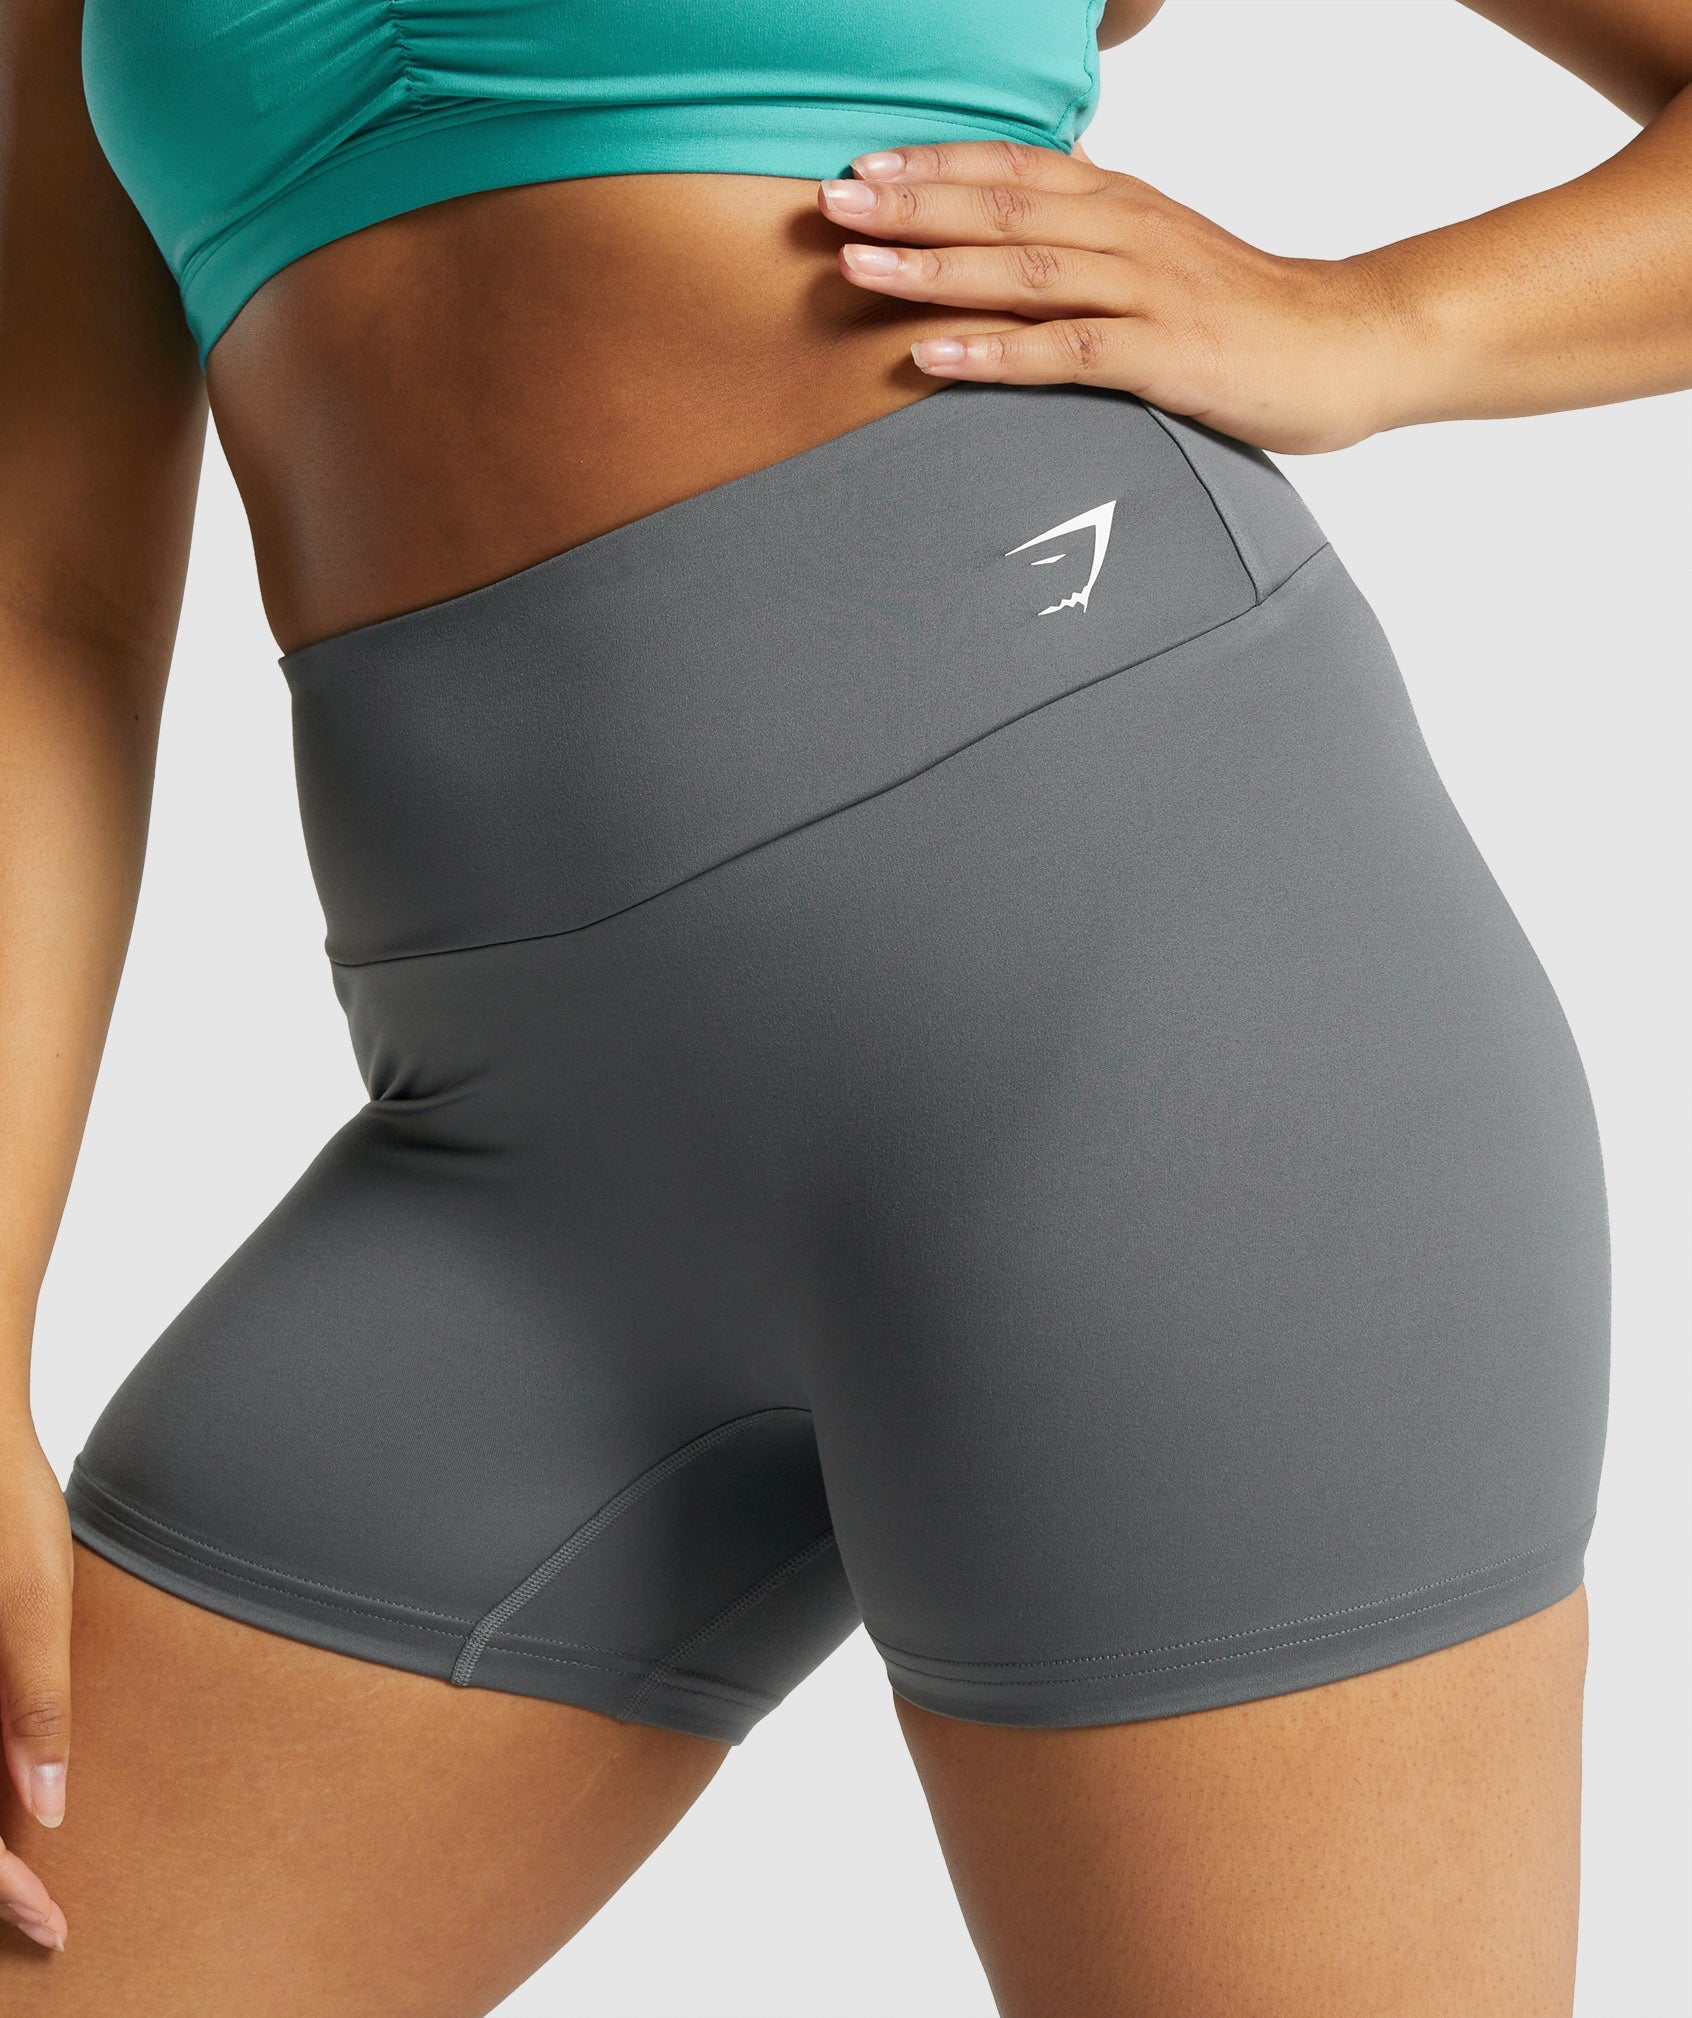 Training Shorts in Charcoal Grey - view 6